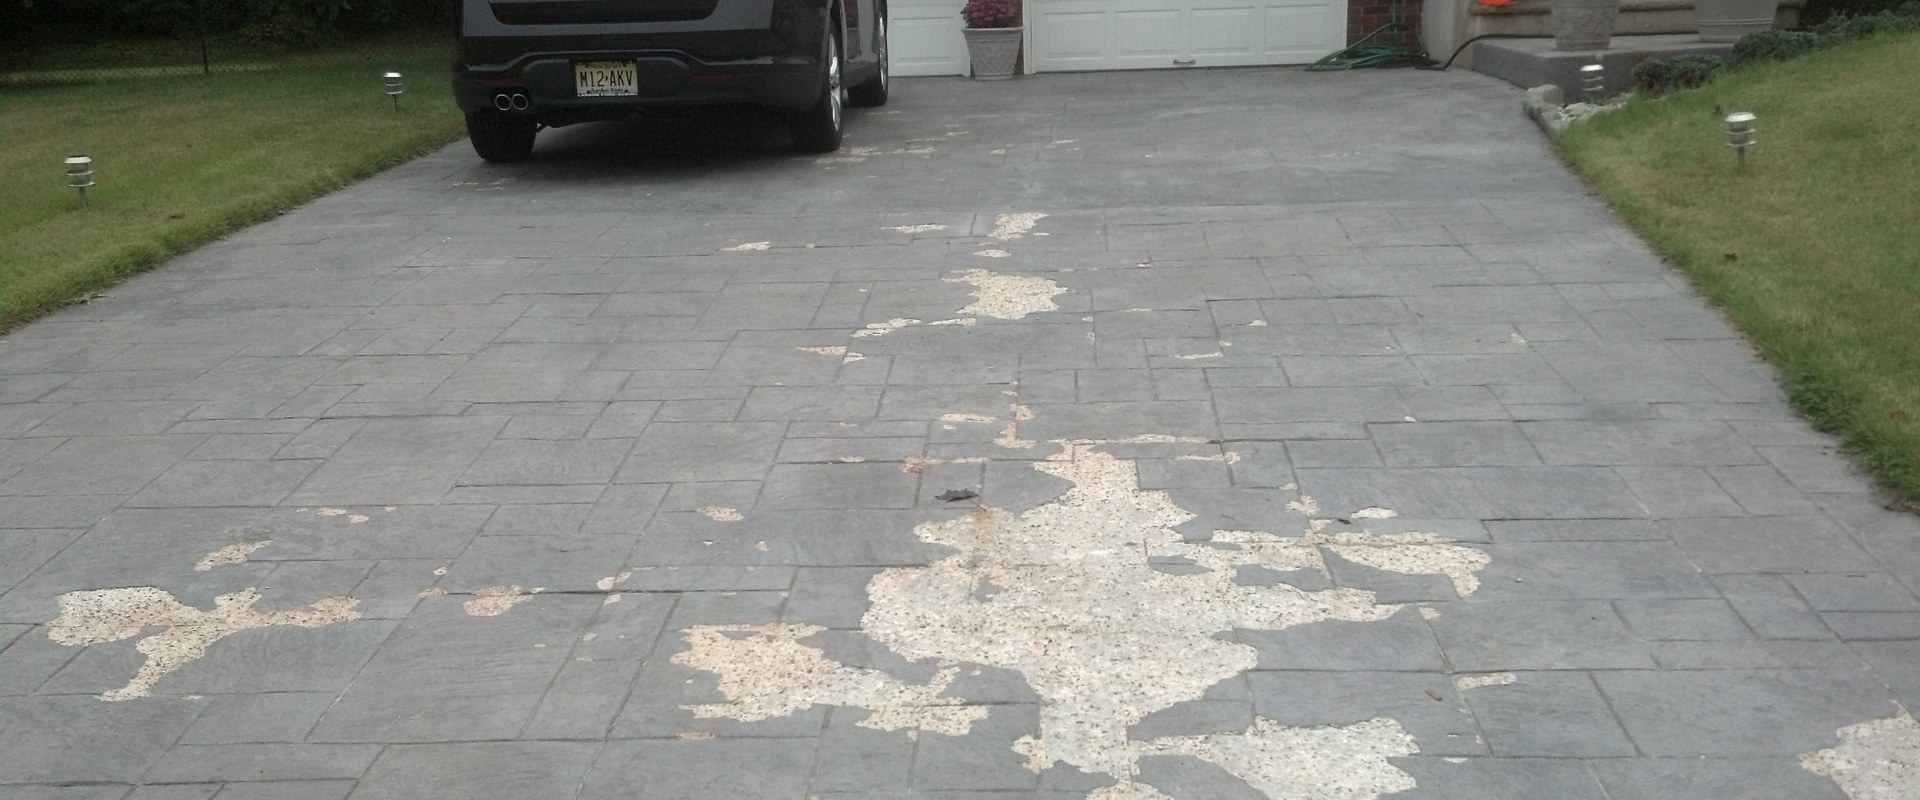 Filling and Sealing Cracks: How to Repair and Protect Your Stamped Concrete